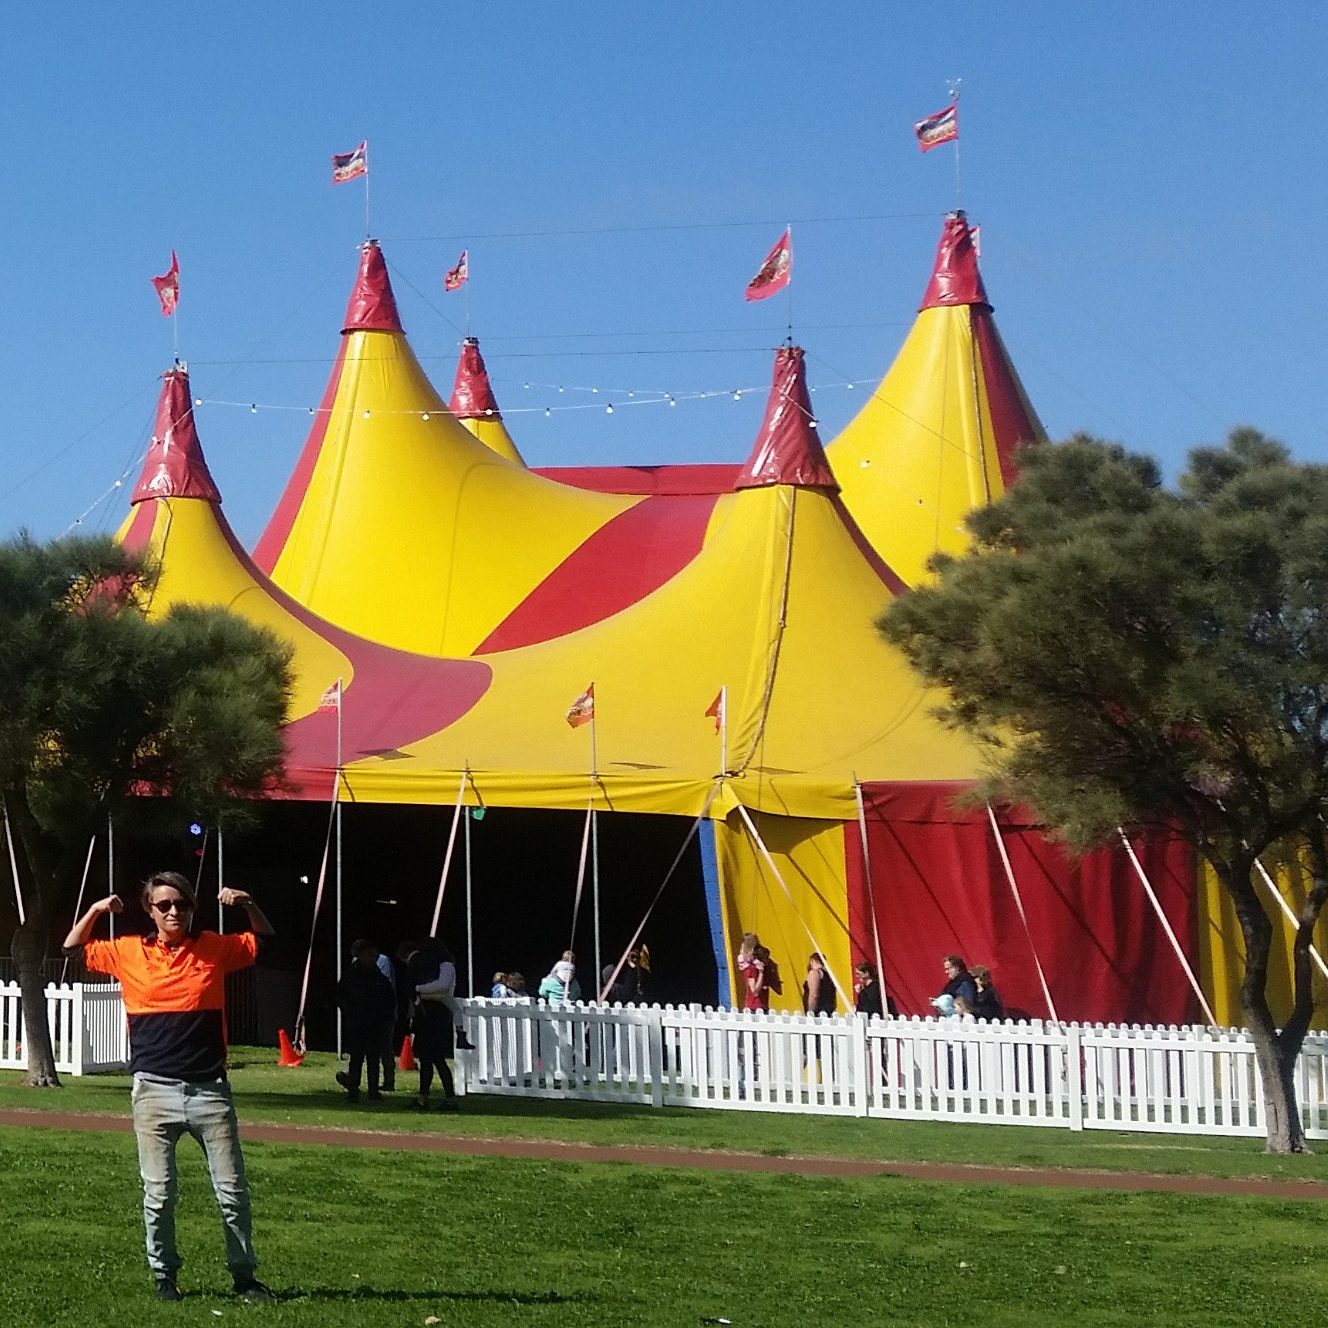 Jot in front of the Circus Tent